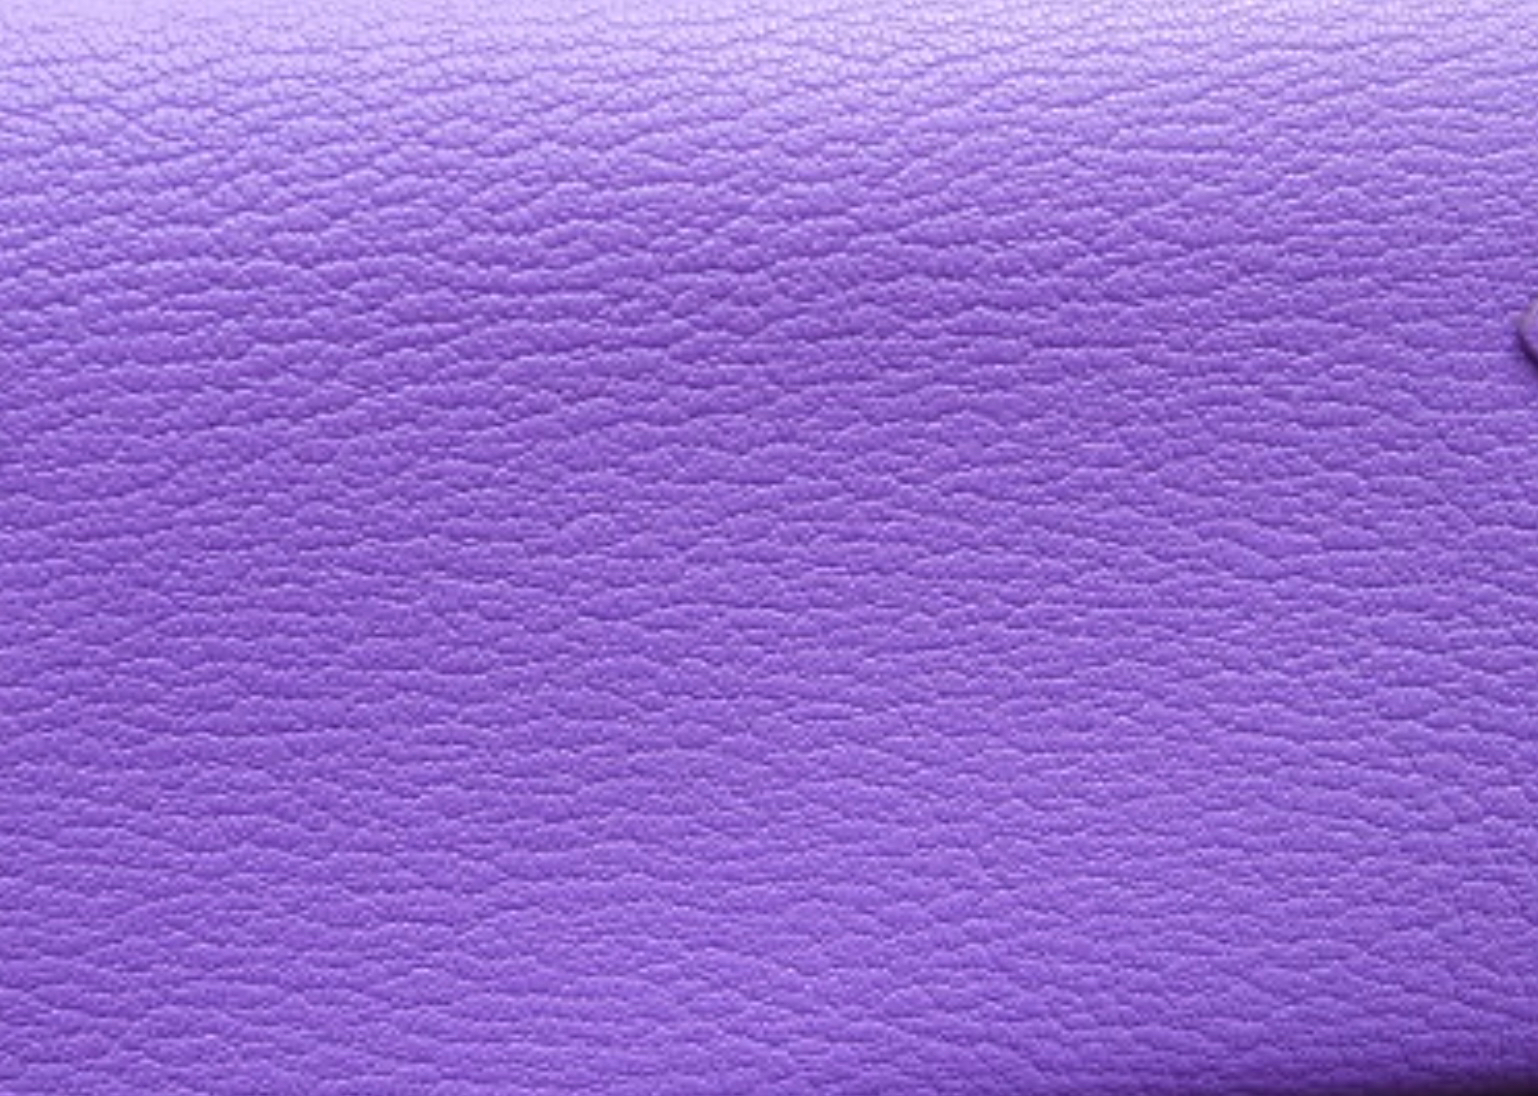 Hermes colors that hold their value – Only Authentics